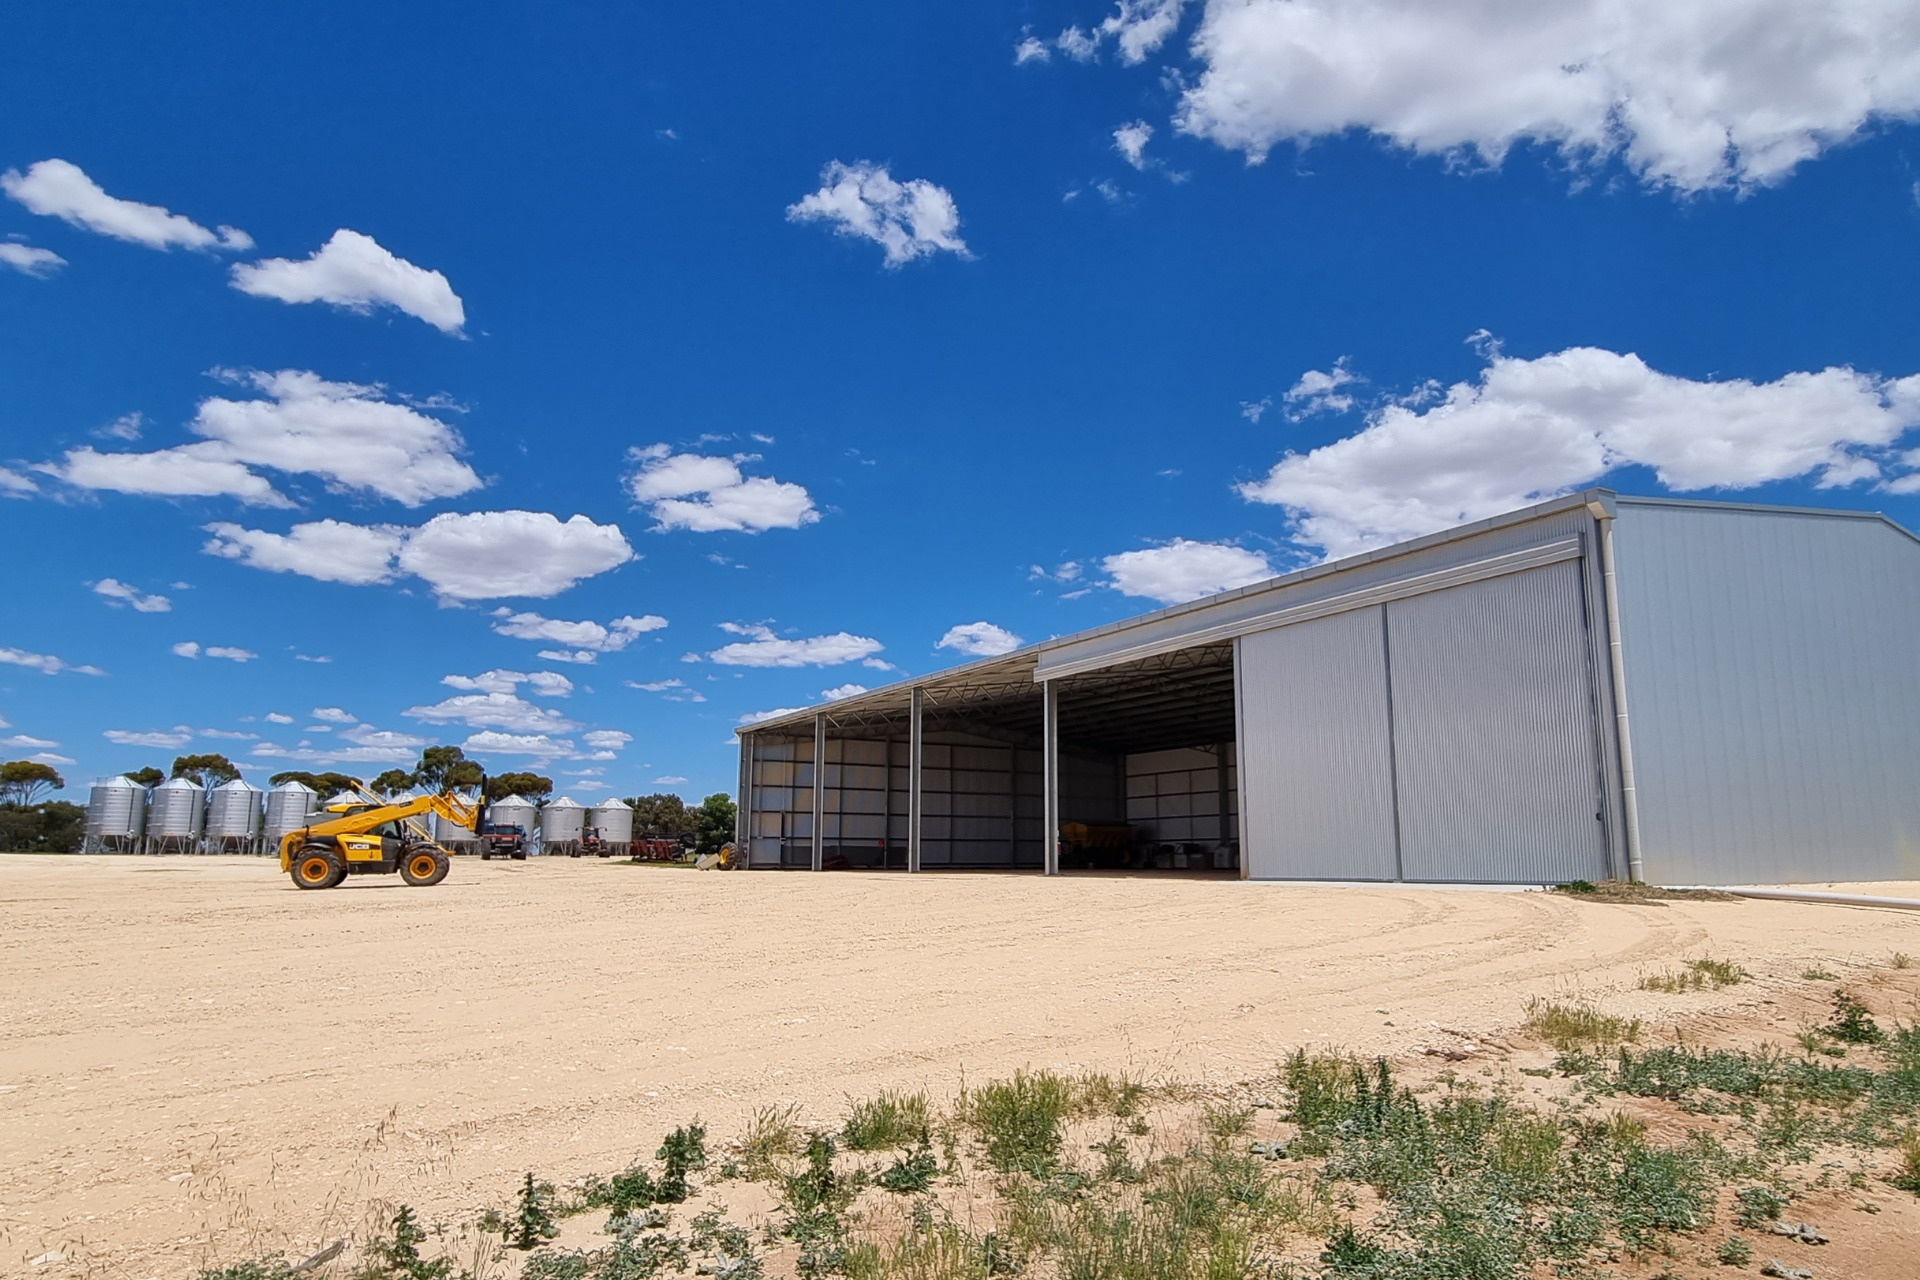 A 45m x 24m machinery shed with one bay enclosed